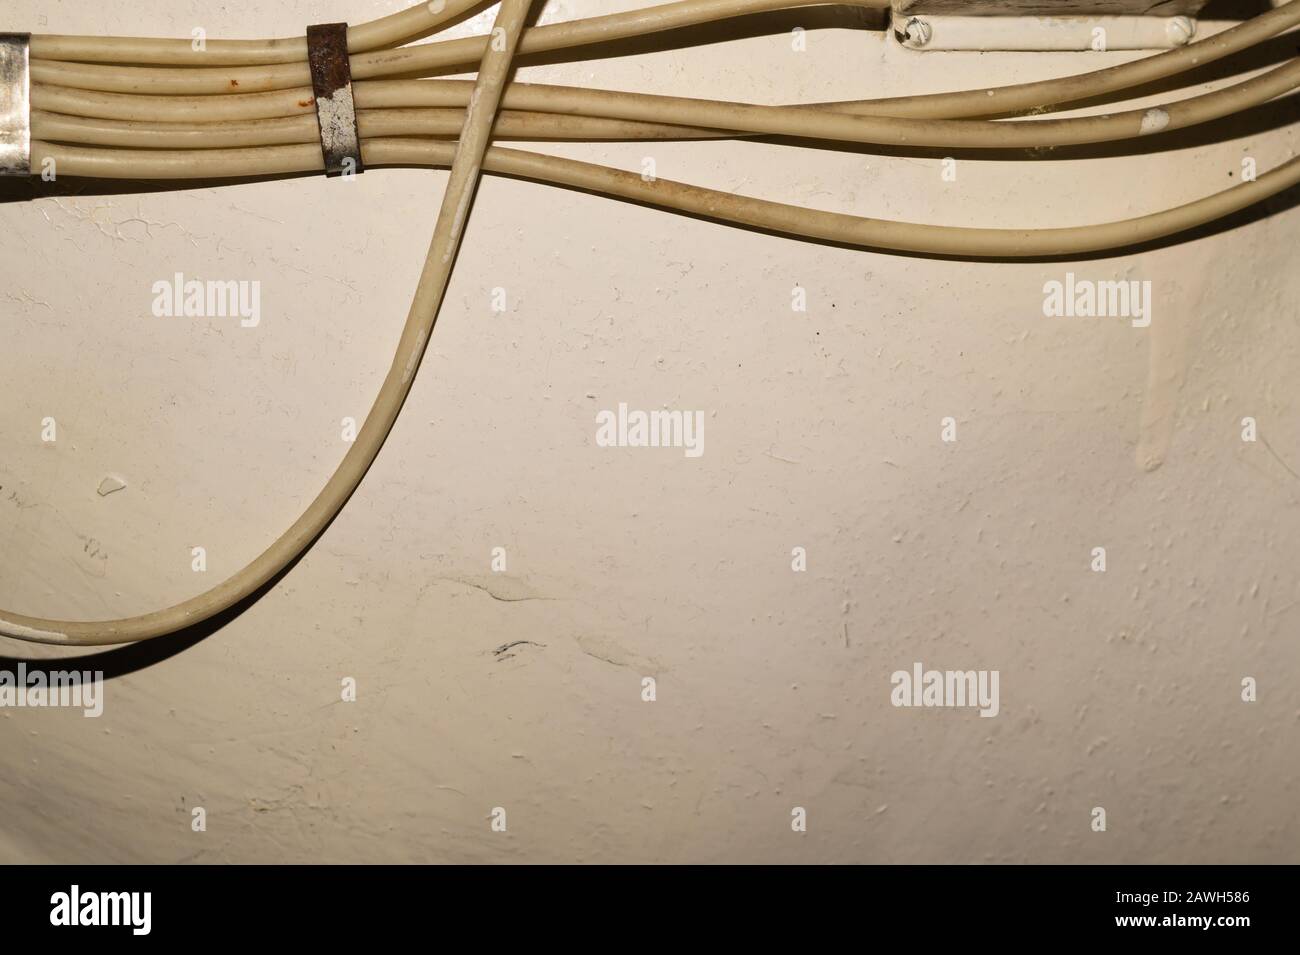 Old electrical wires or cables hanging on the wall. industrial background Stock Photo